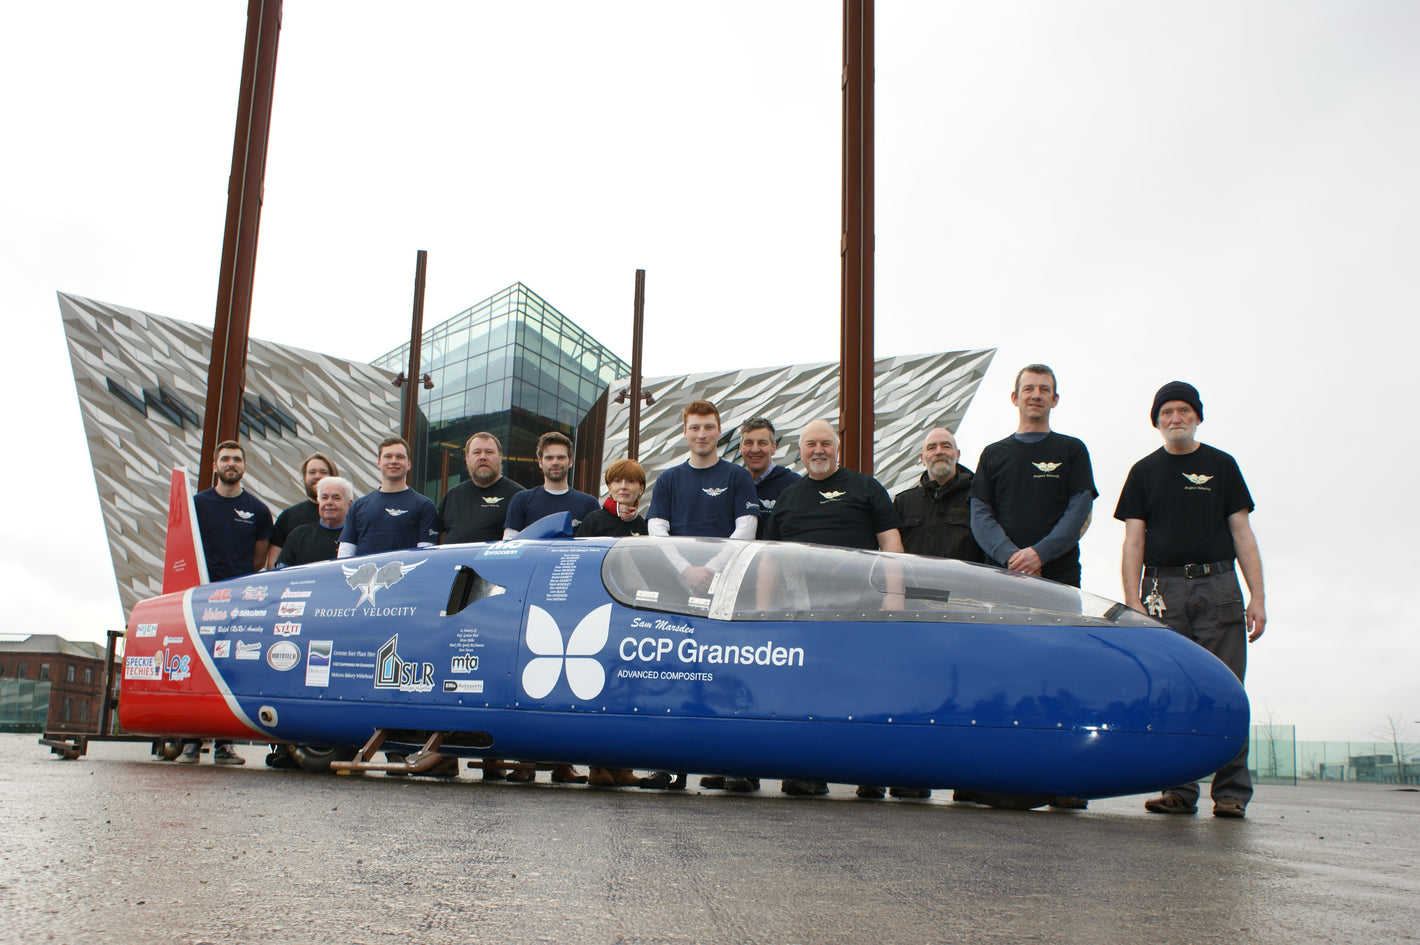 The Project Velocity team which was led by local engineer Sam Marsden